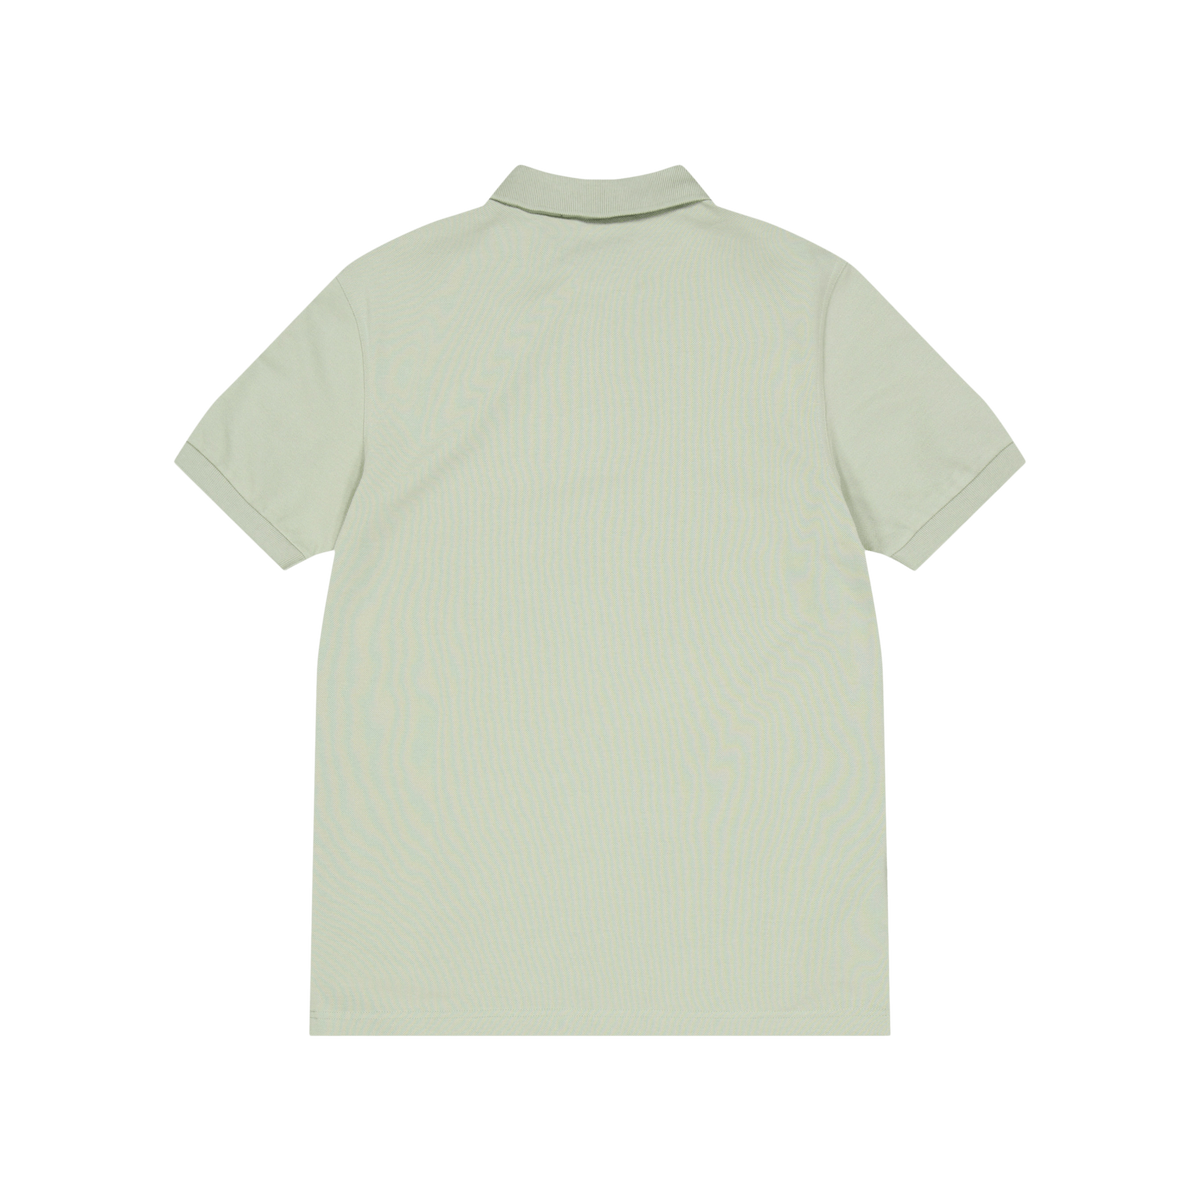 Fred Perry Plain Fred Perry Shirt M37 Seagrass